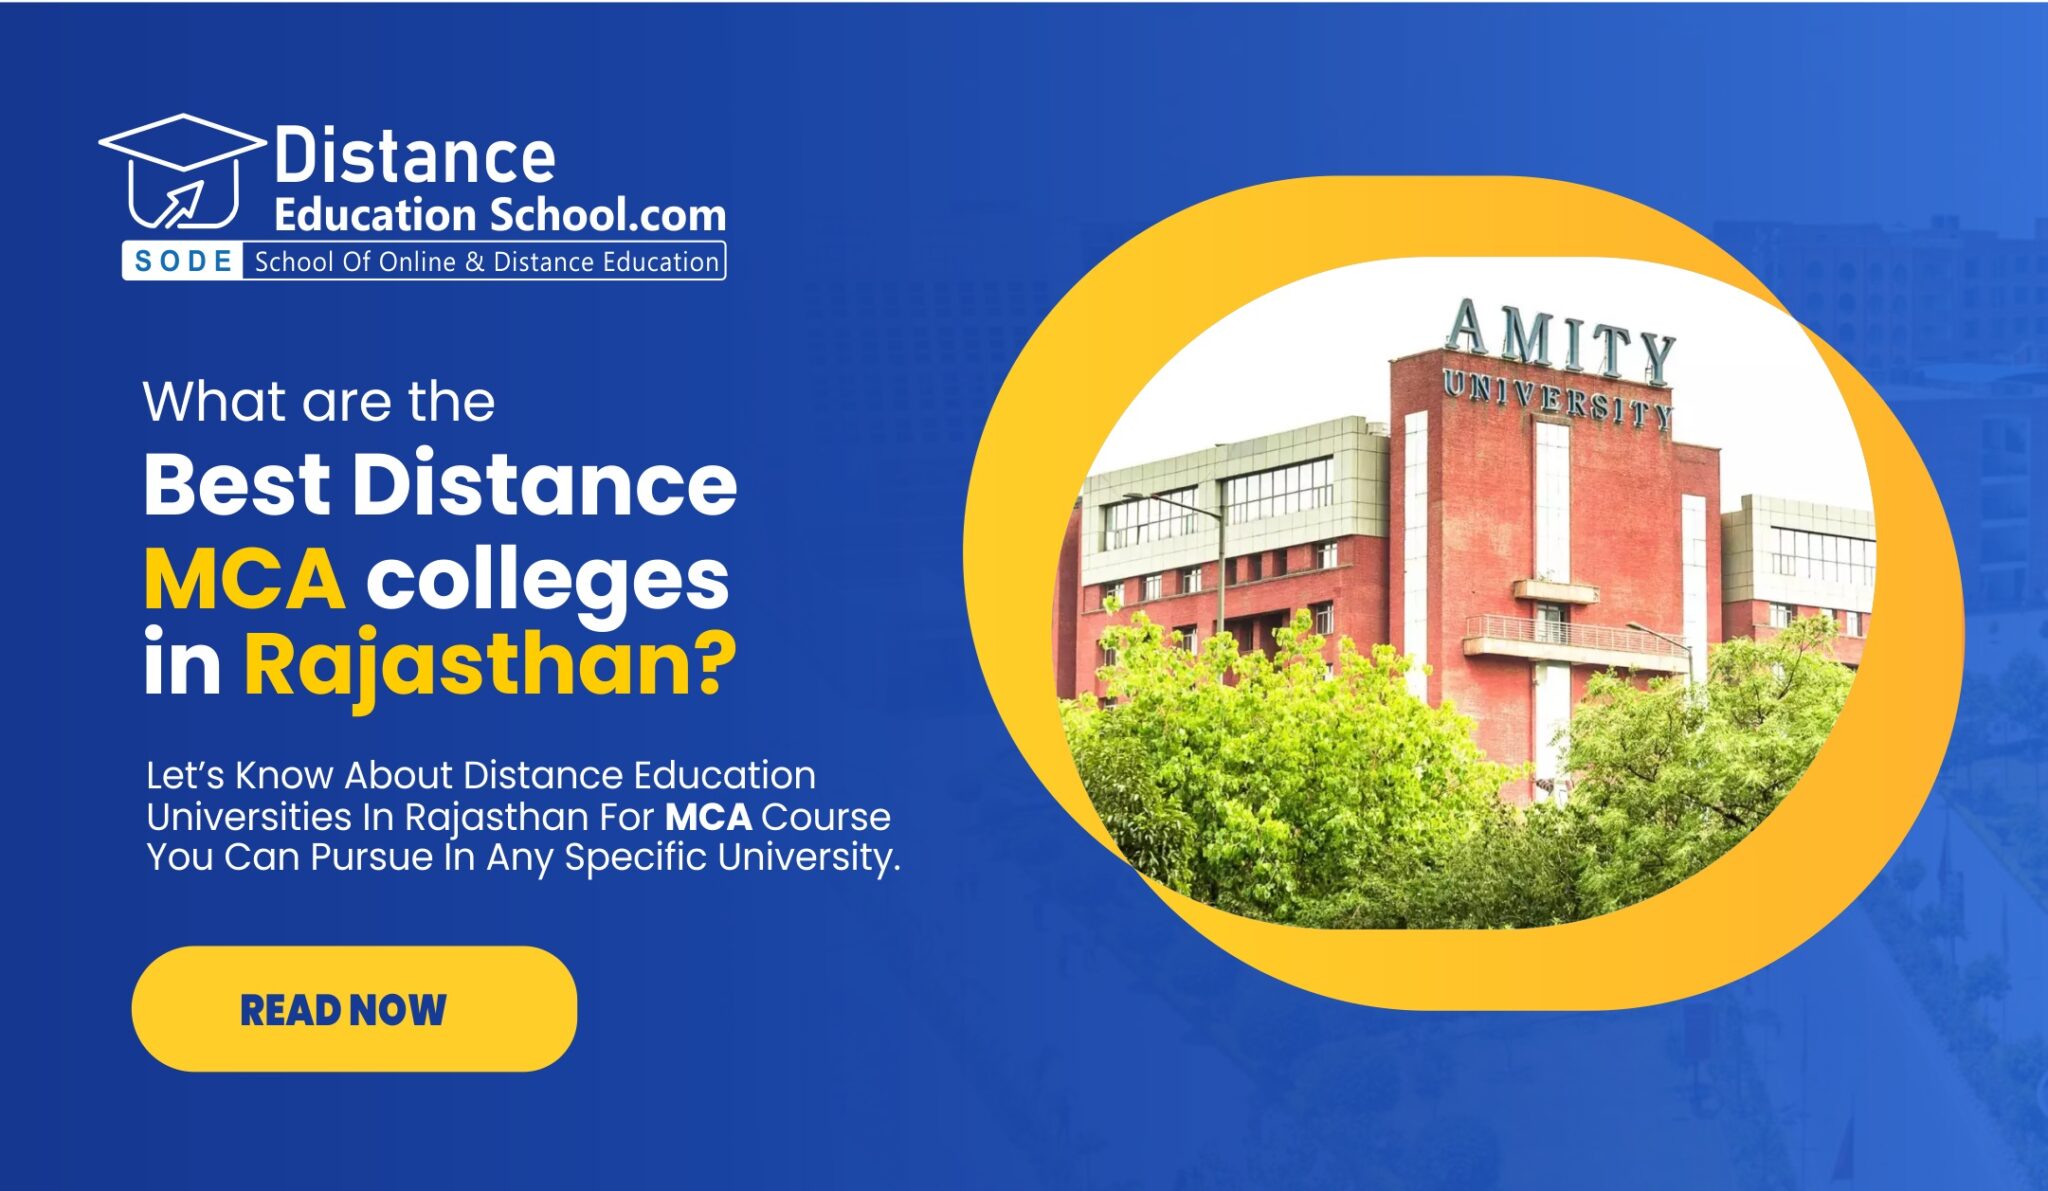 Distance MCA colleges in Rajasthan